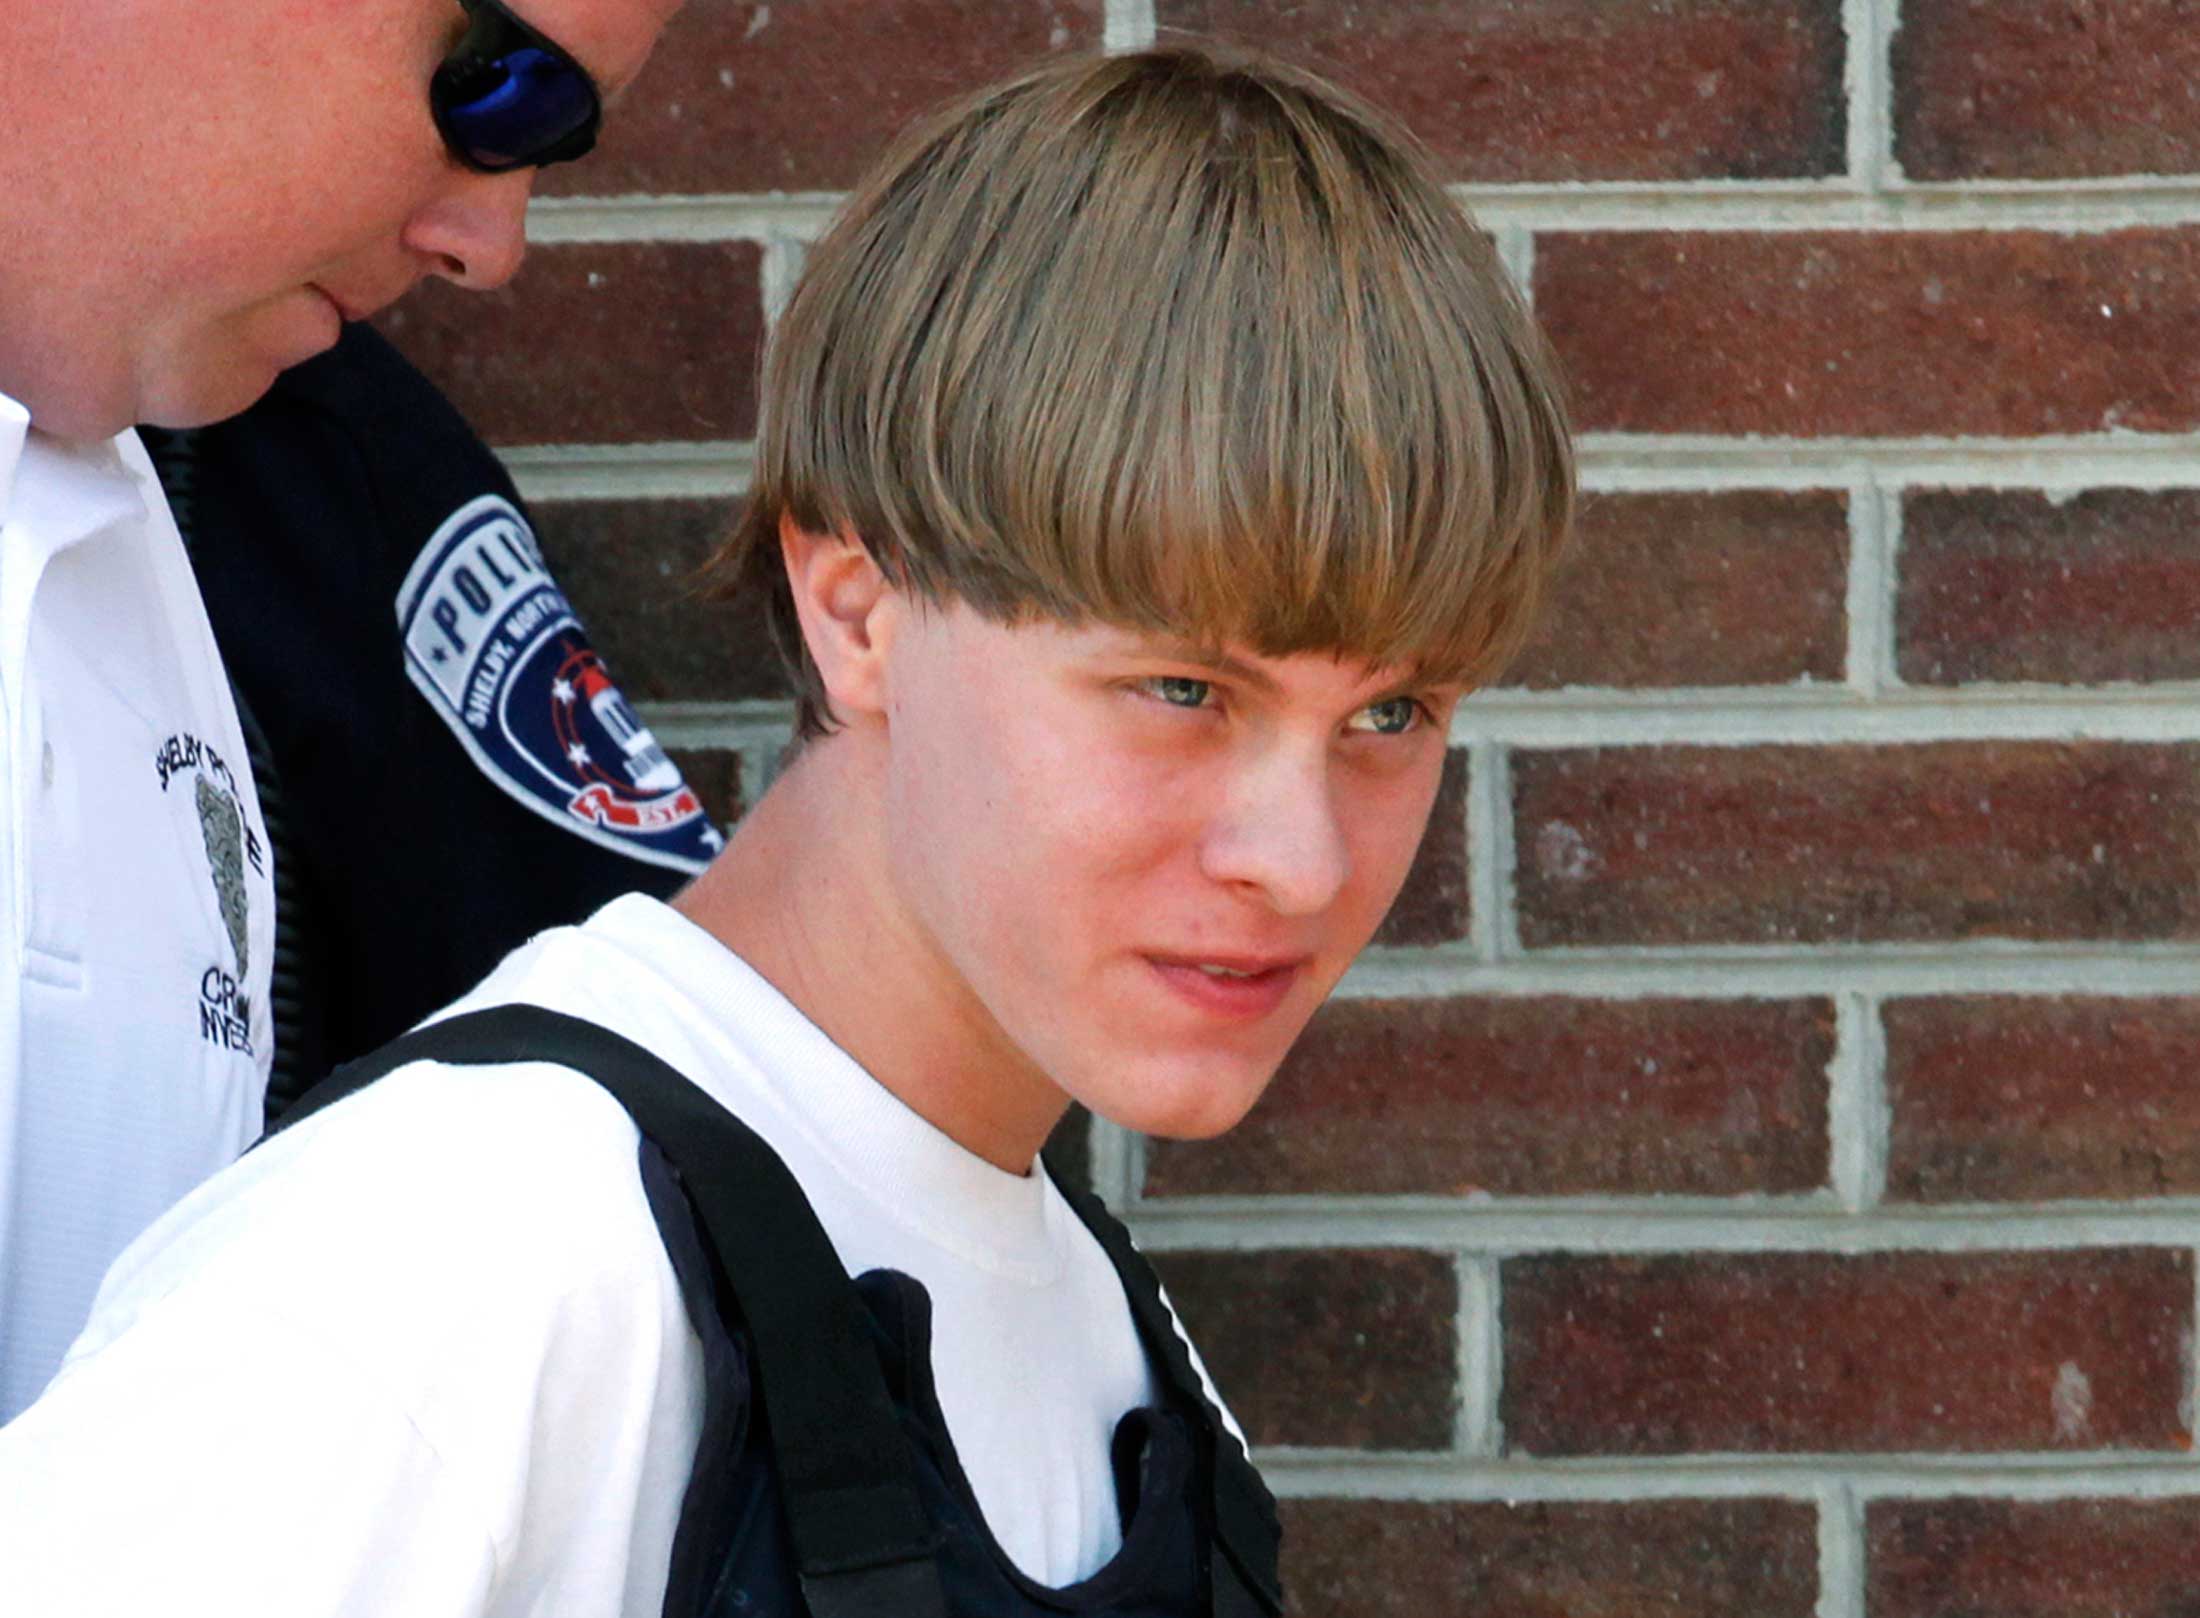 Police lead suspected shooter Dylann Roof into the courthouse in Shelby, North Carolina, June 18, 2015. (Jason Miczek — Reuters)